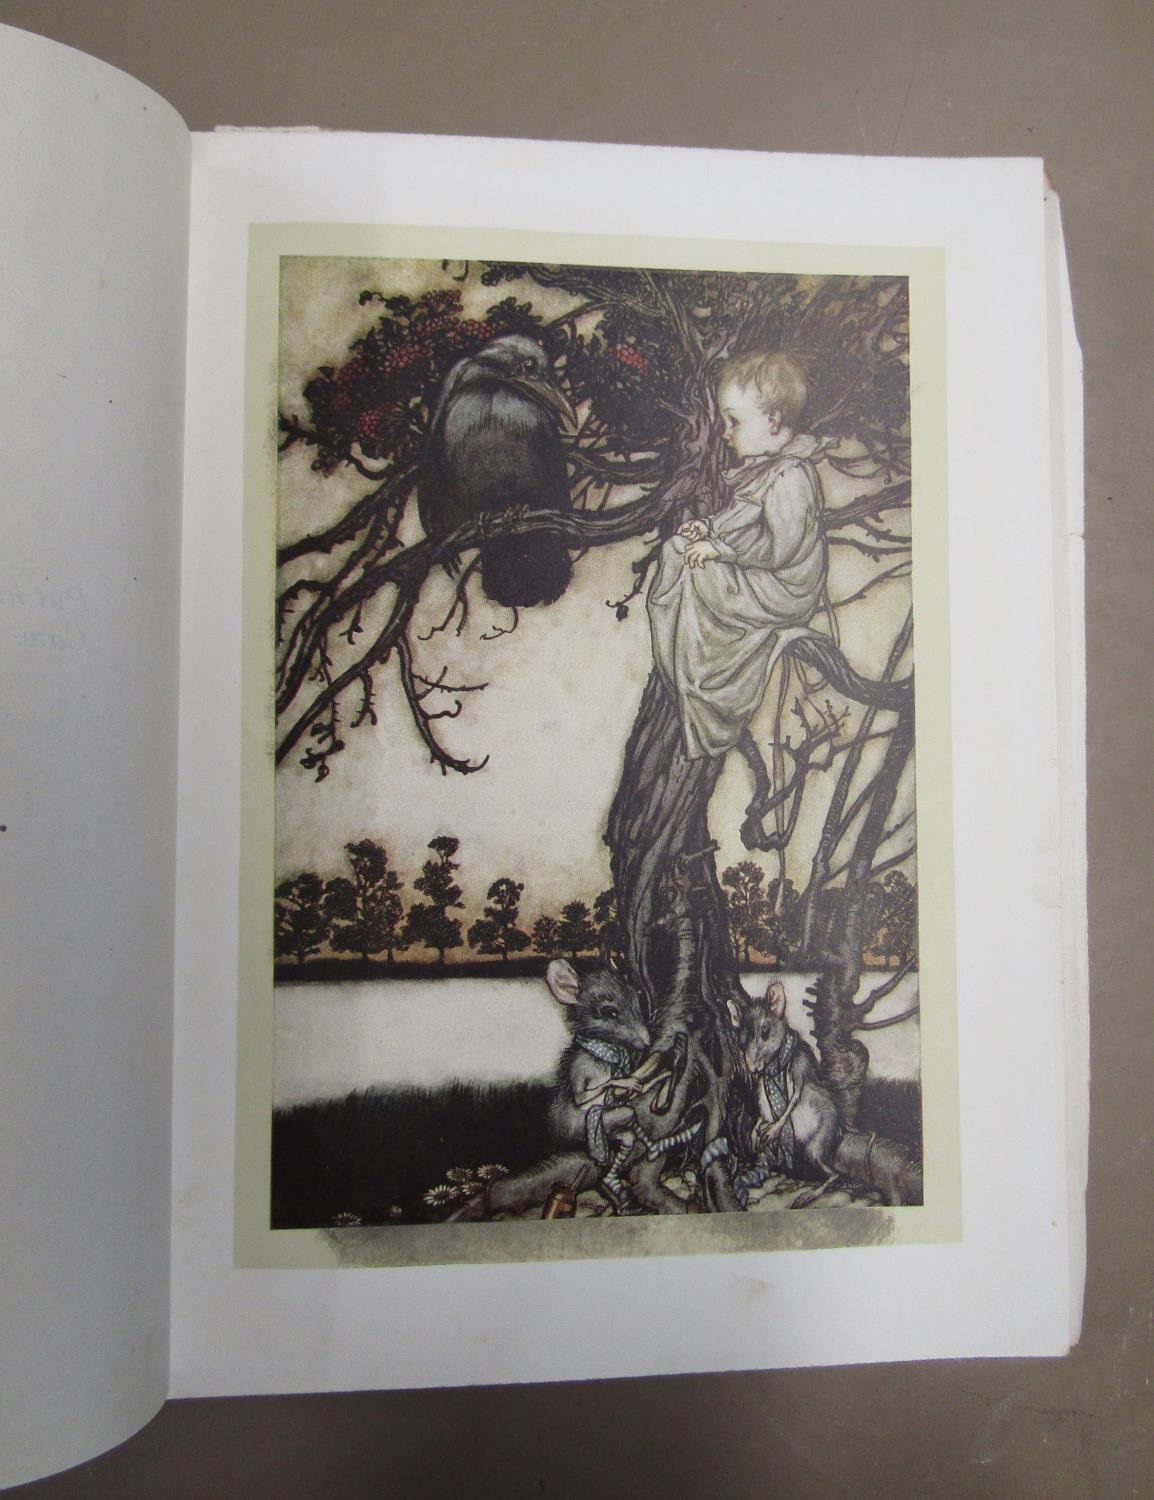 Books about/illustrated by Arthur Rackham including Siegfried The Twilight Of The Gods, The Rhine - Image 5 of 9